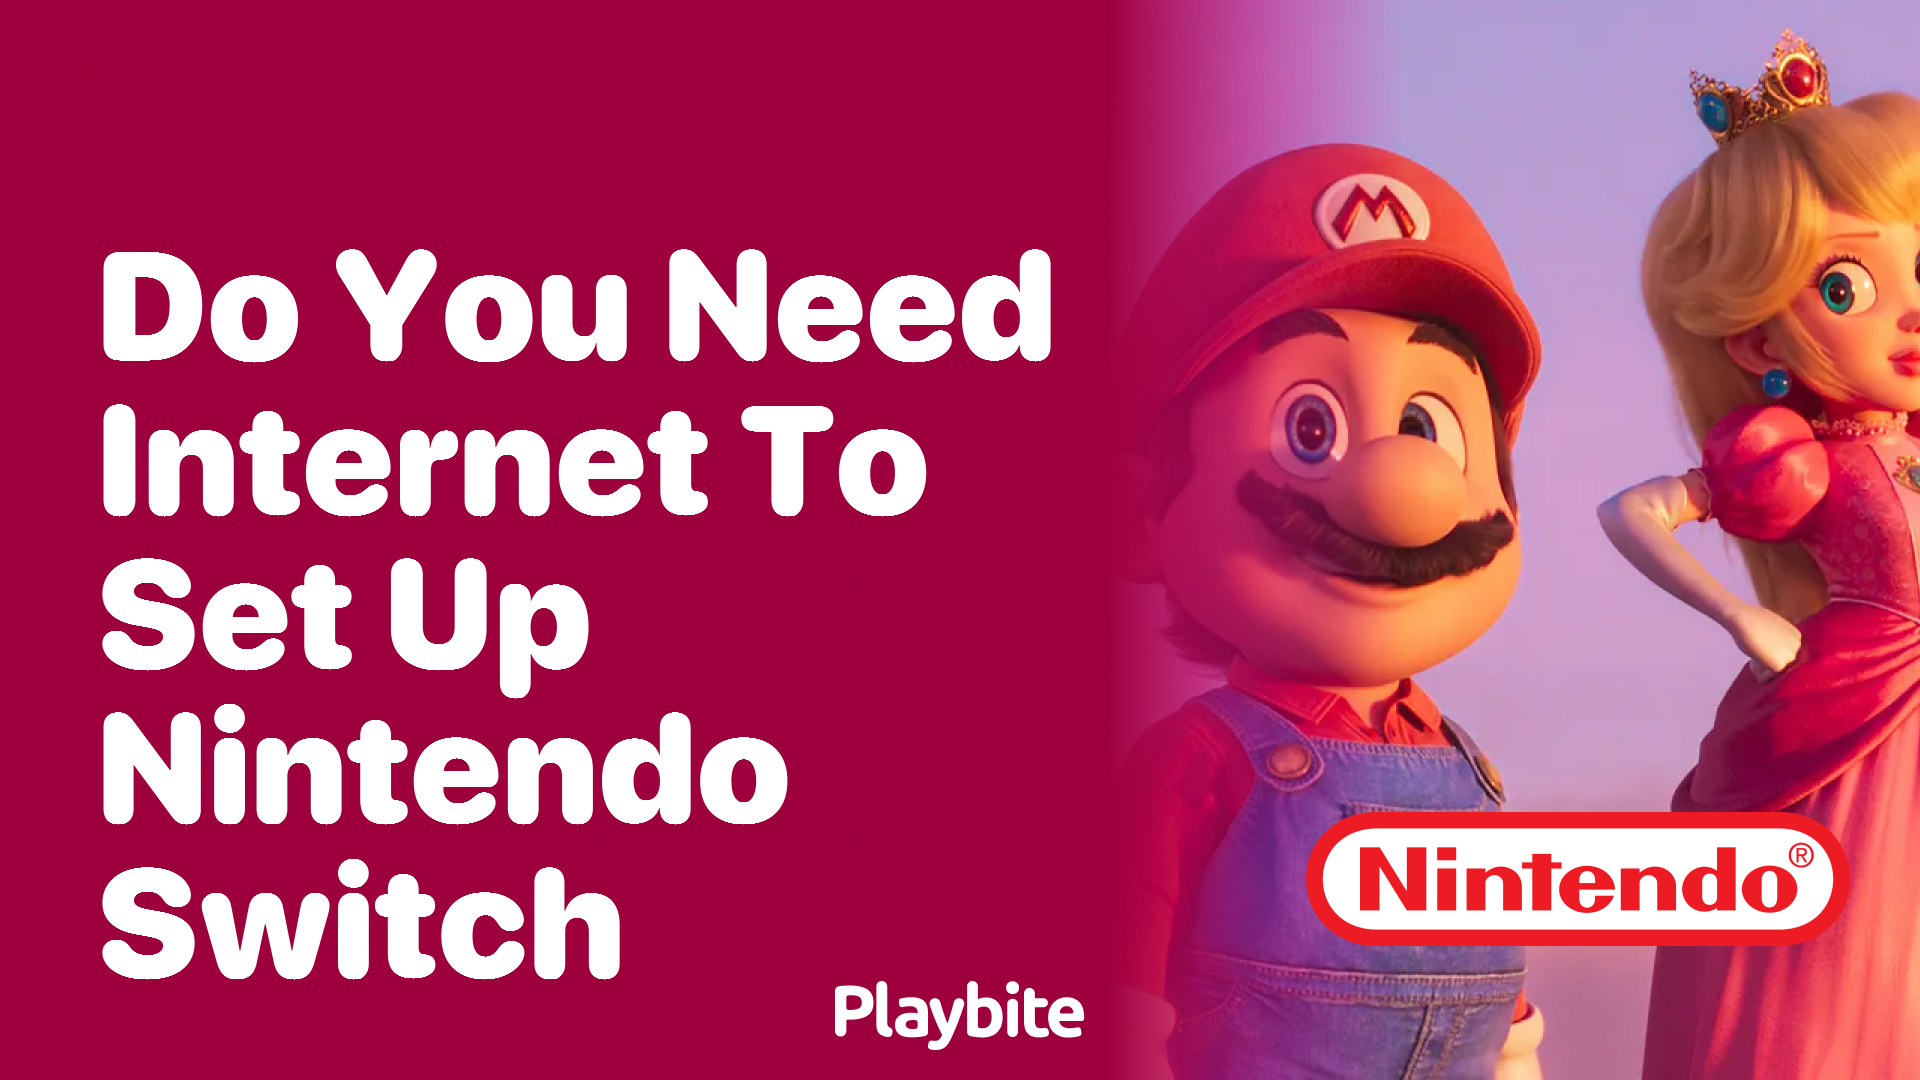 Do You Need Internet to Set Up a Nintendo Switch?